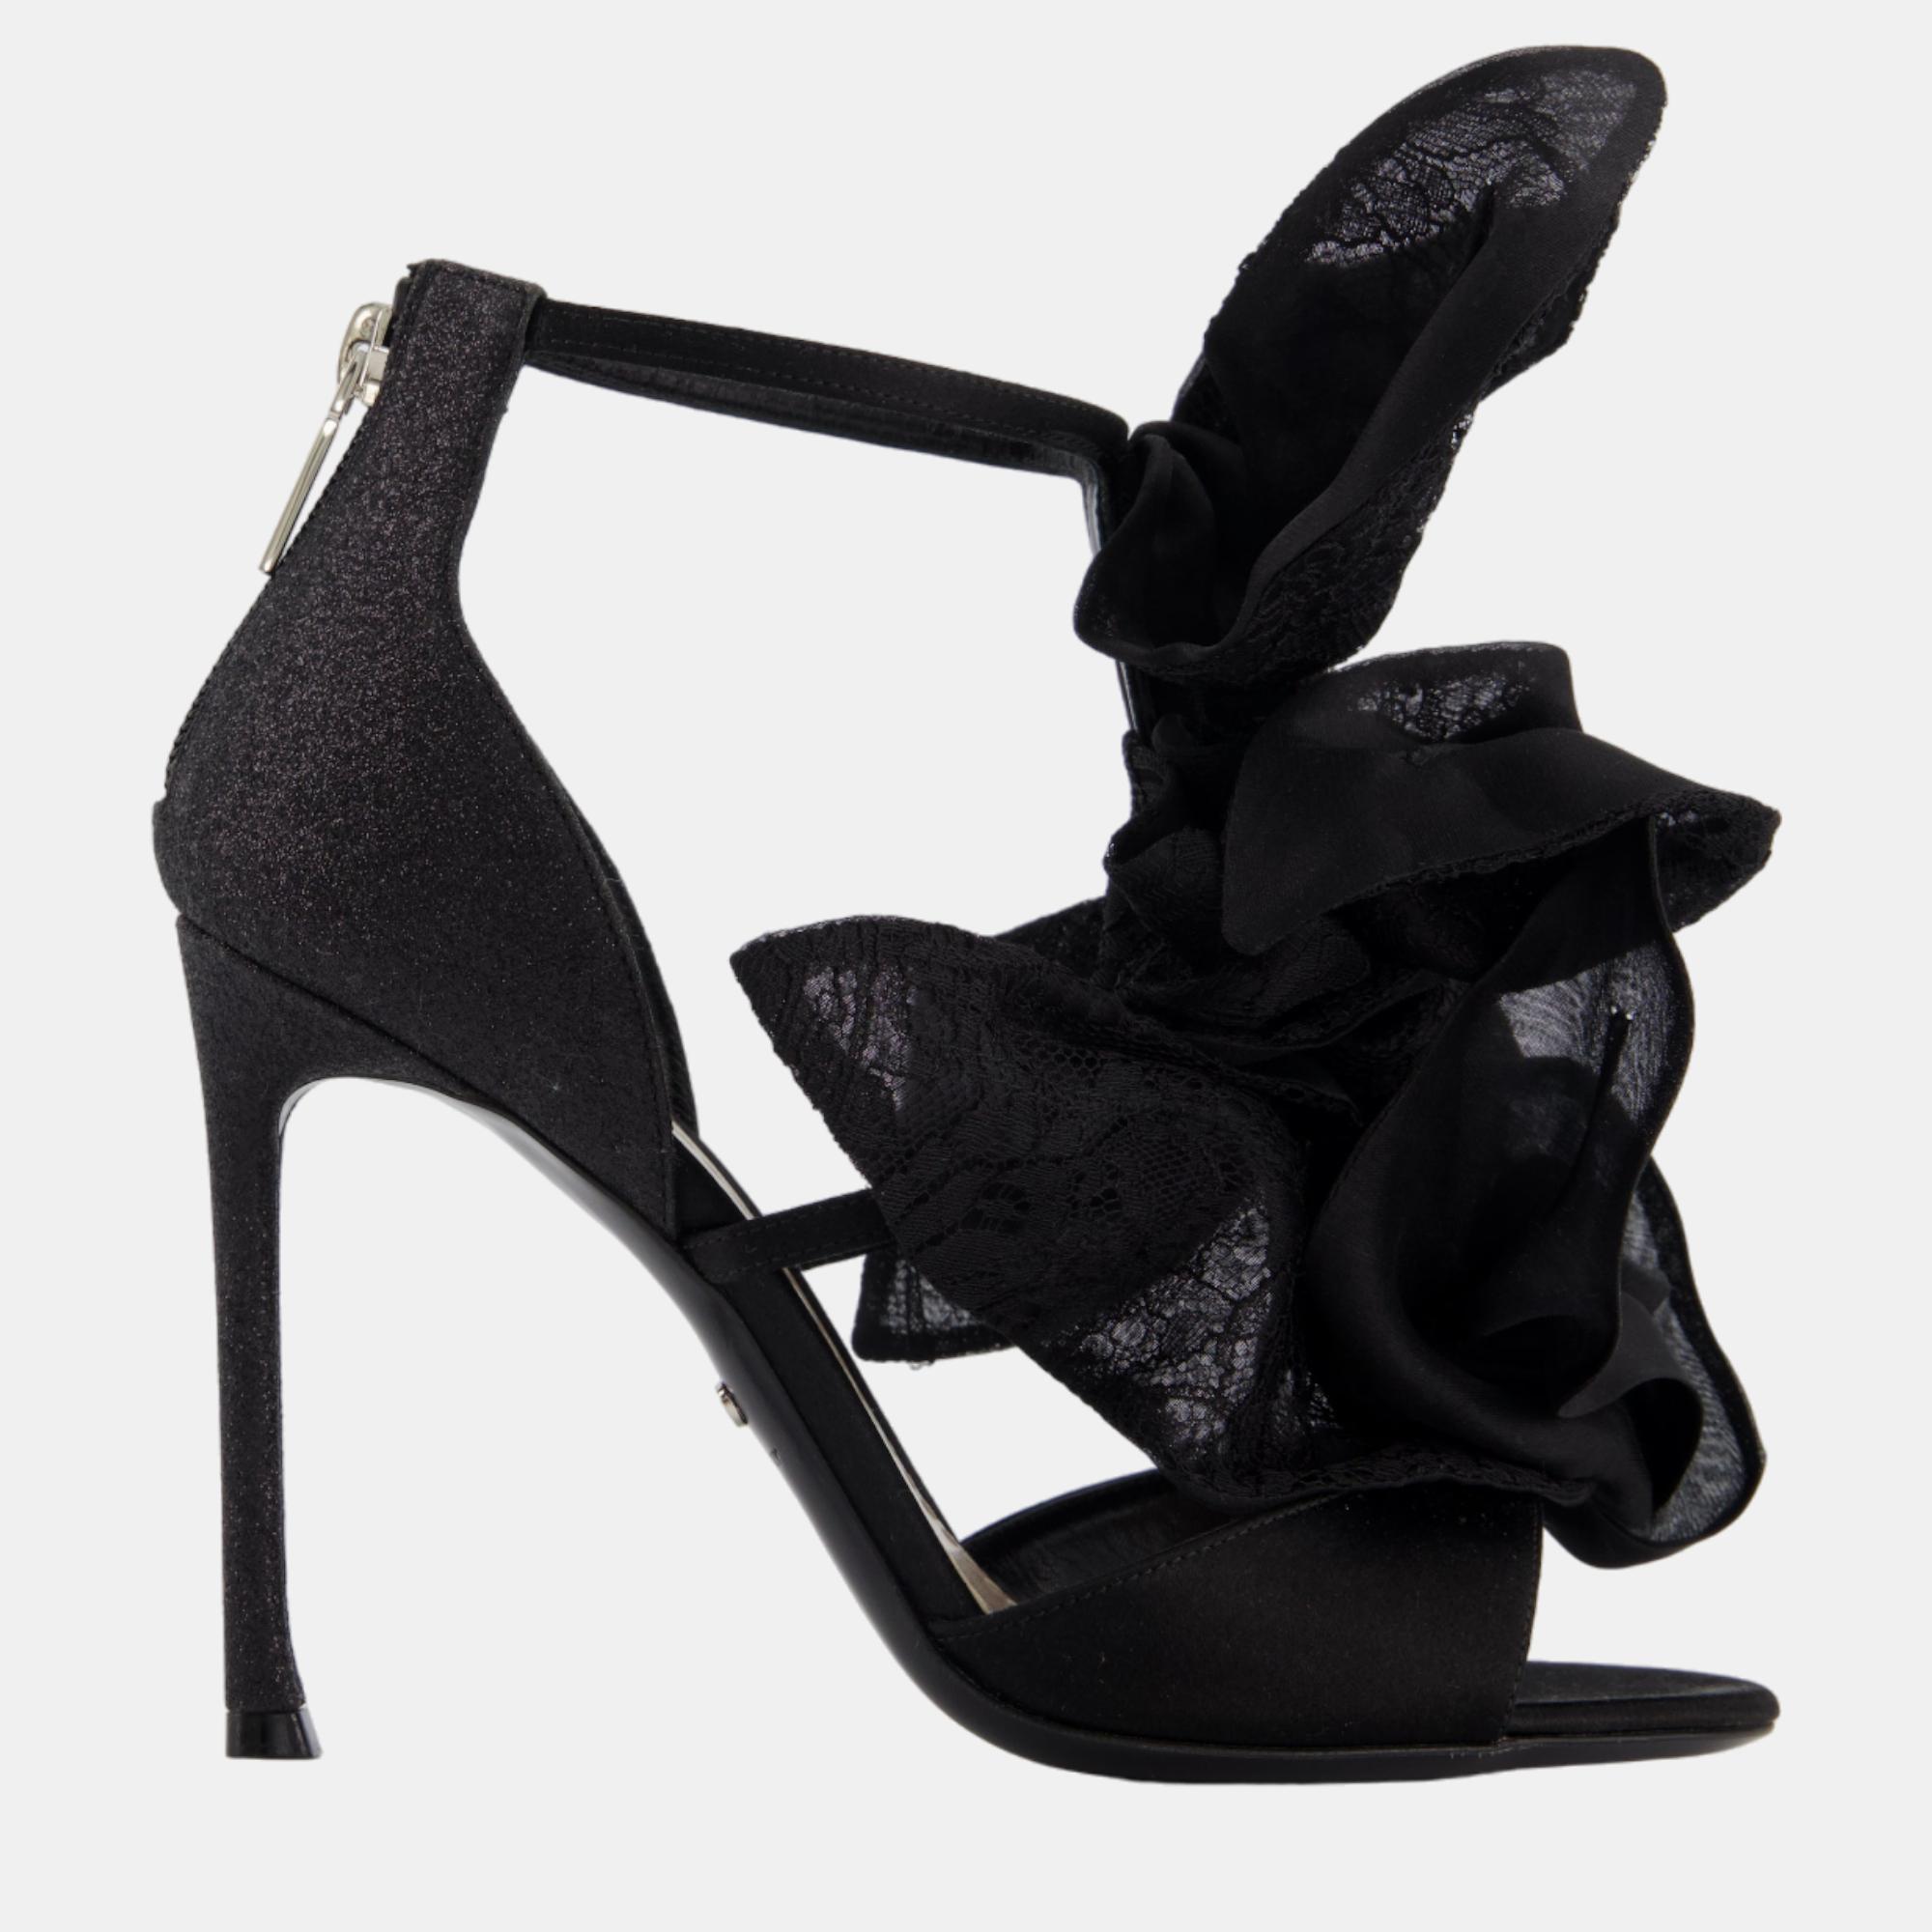 Christian dior black satin and lace applique evening ankle strap heels size 37